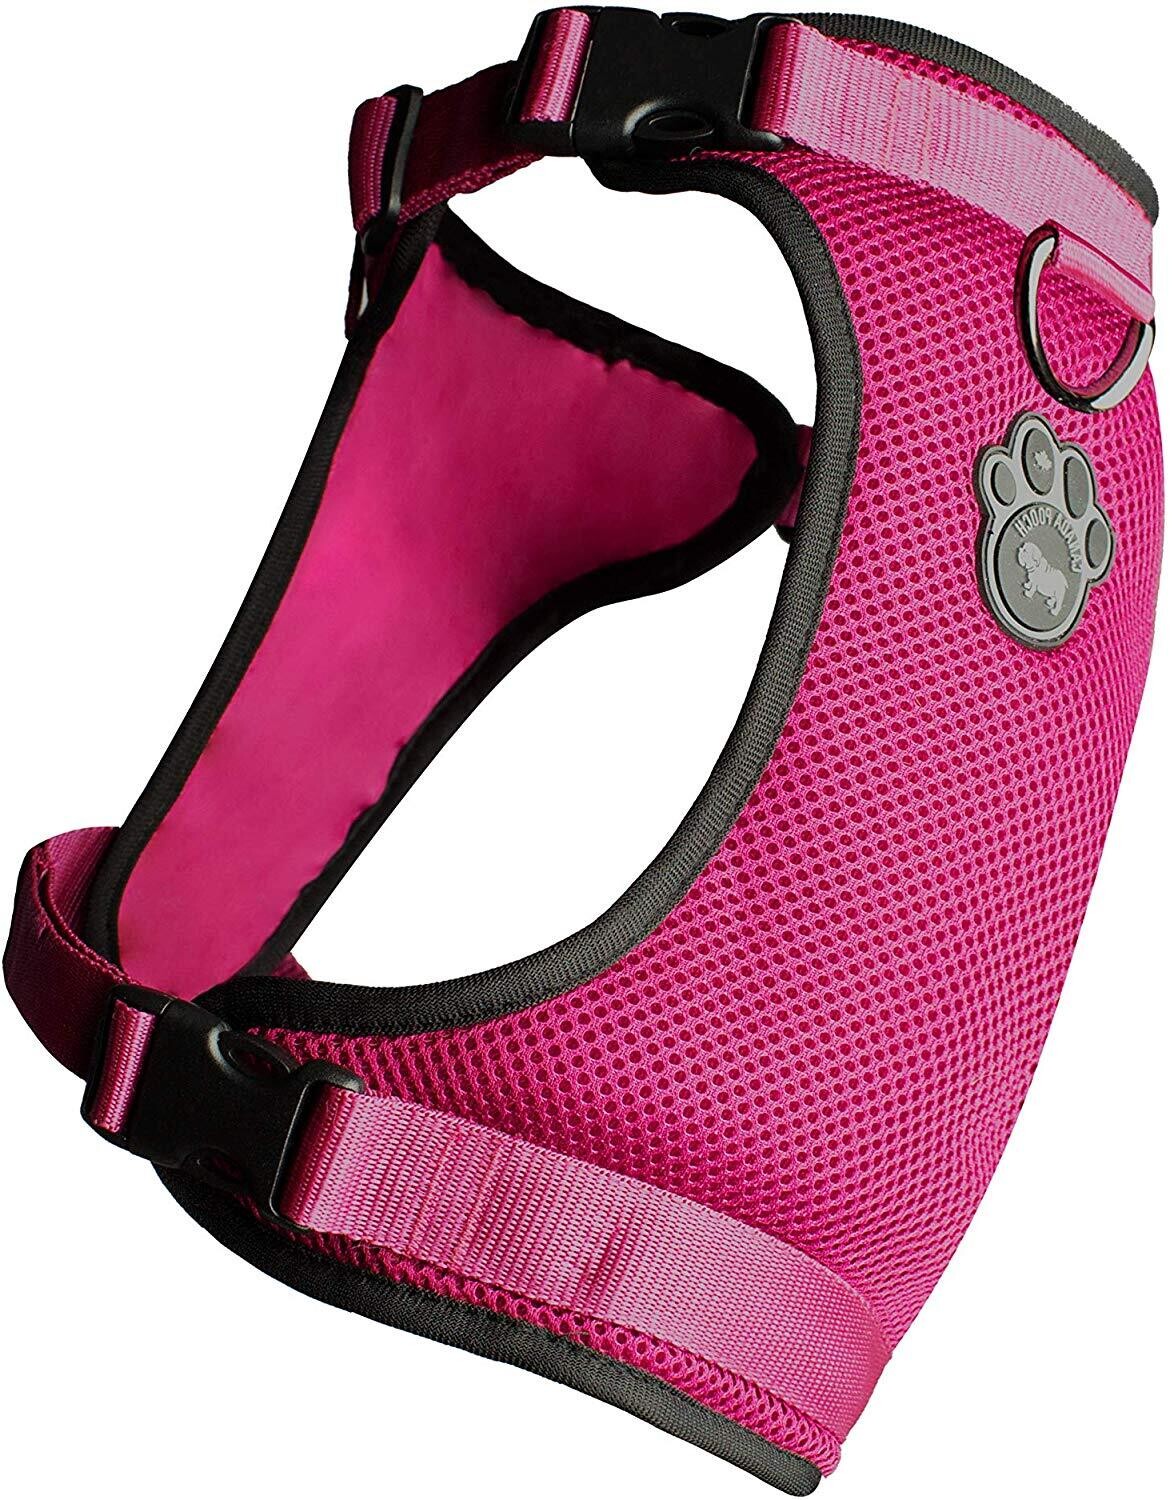 CANADA POOCH EVERYTHING HARNESS - PINK SMALL